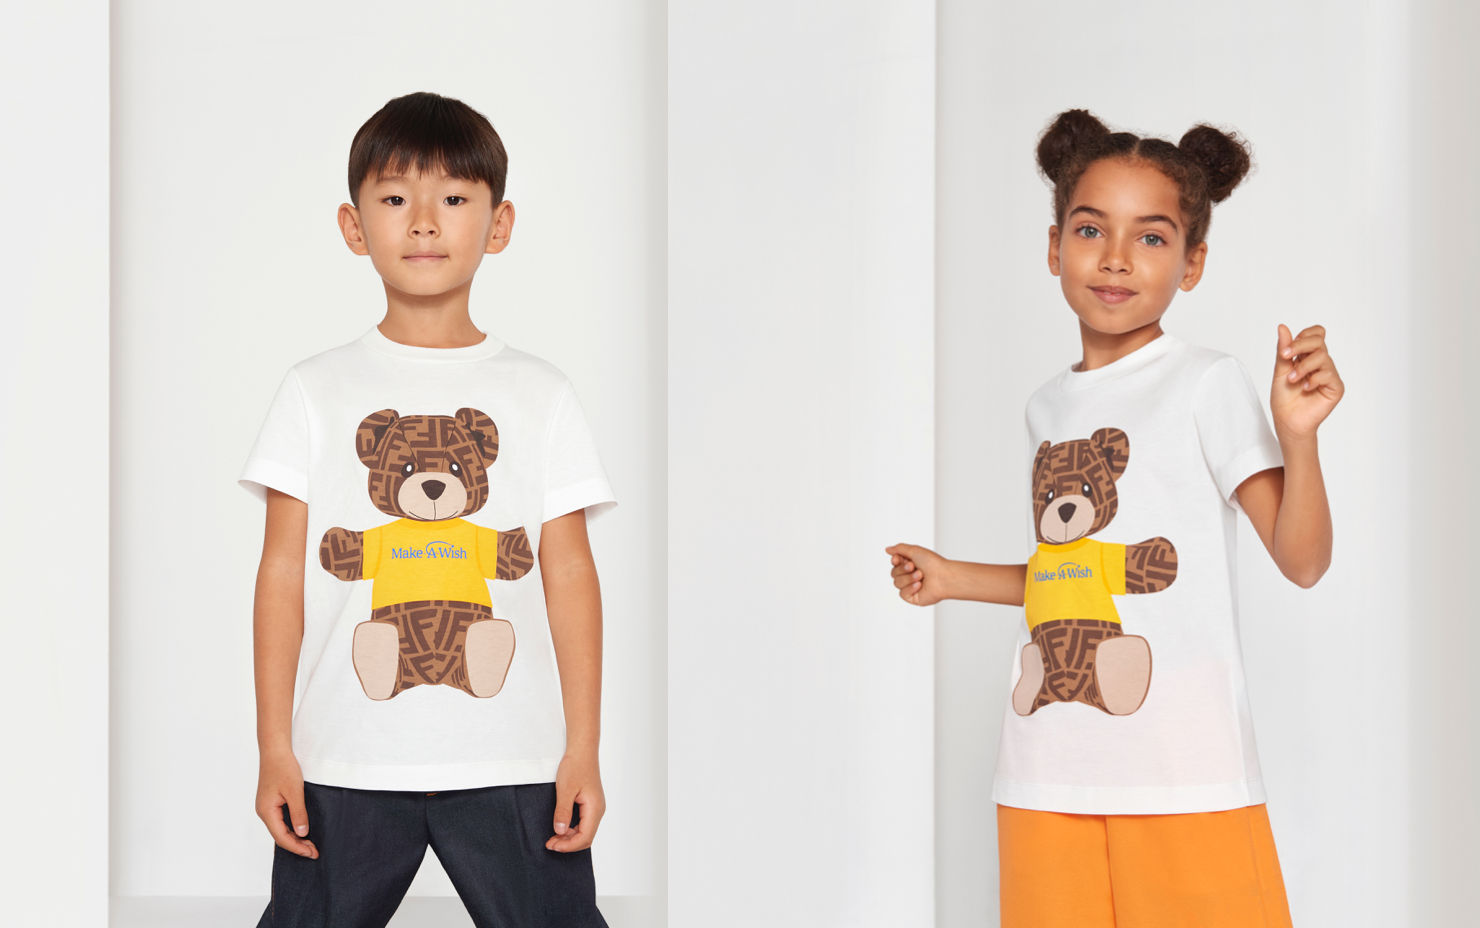 Get Your Hands On The Fendi Kids T-Shirt And Contribute To Make-A-Wish  Foundation